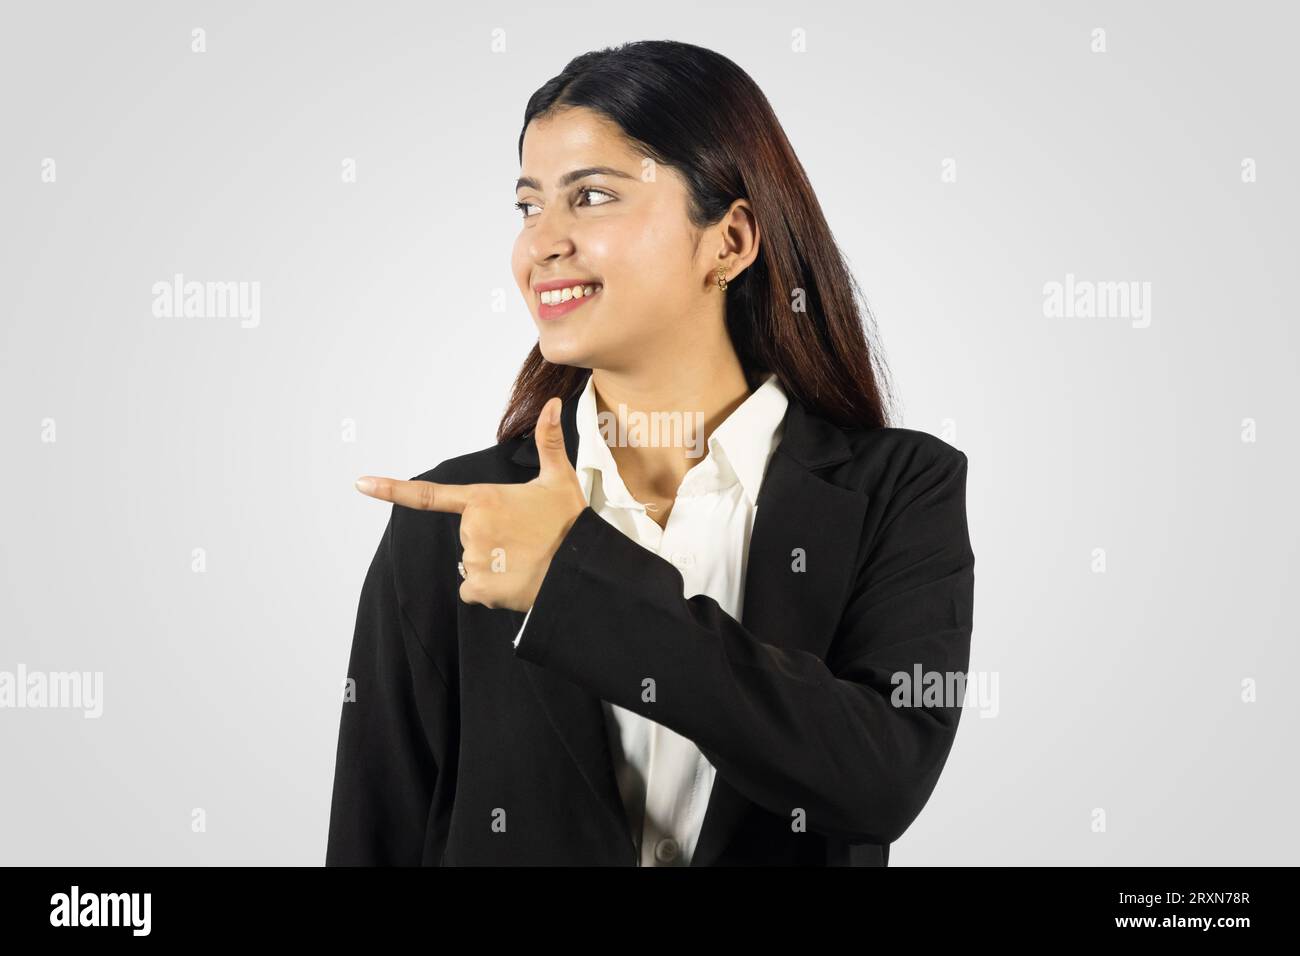 Beautiful and Happy Smiling Asian Young Girl from Nepal giving several gestures in a formal dress Stock Photo